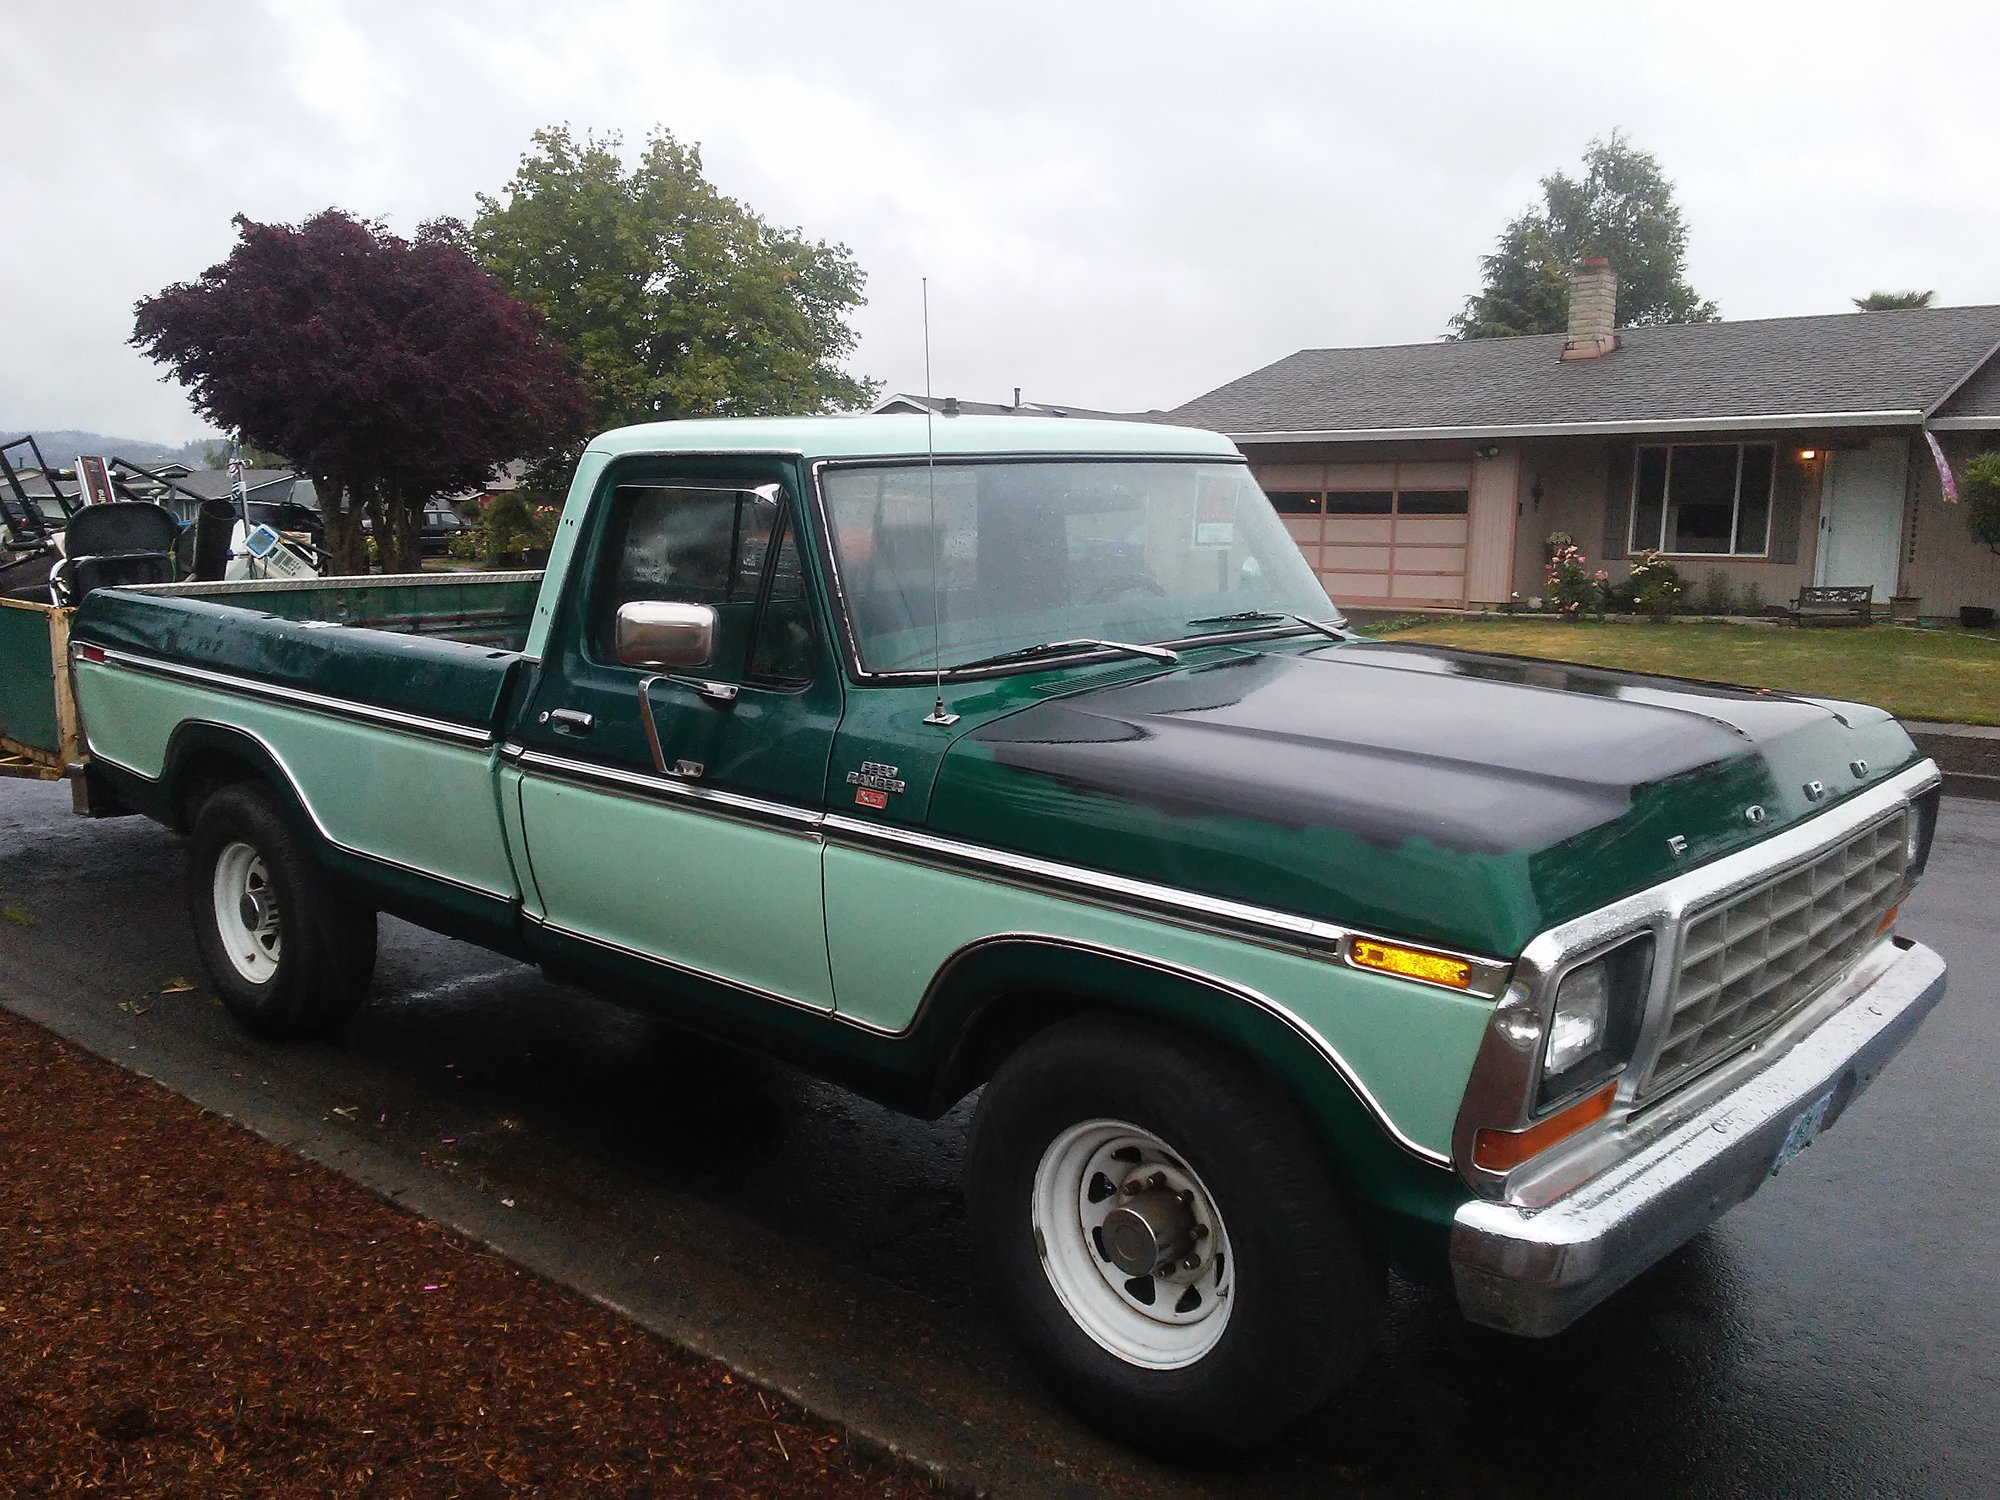 1979 Ford F-250 - 1979 Ford F250 XLT Ranger Dentside longbed - Used - VIN F25JRFB0636000000 - 49,758 Miles - 8 cyl - 2WD - Automatic - Truck - Other - Cornelius, OR 97113, United States